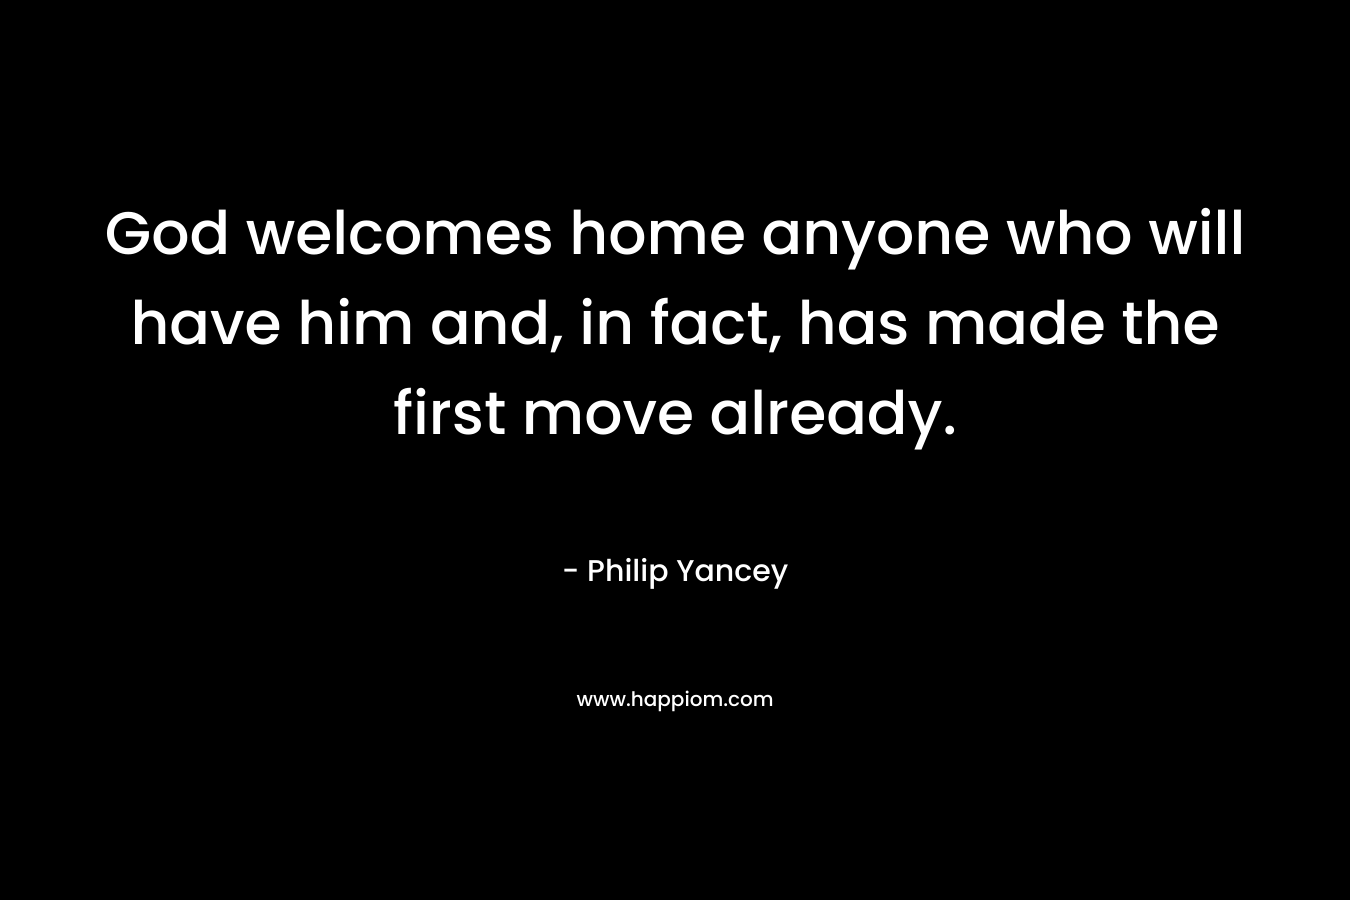 God welcomes home anyone who will have him and, in fact, has made the first move already. – Philip Yancey